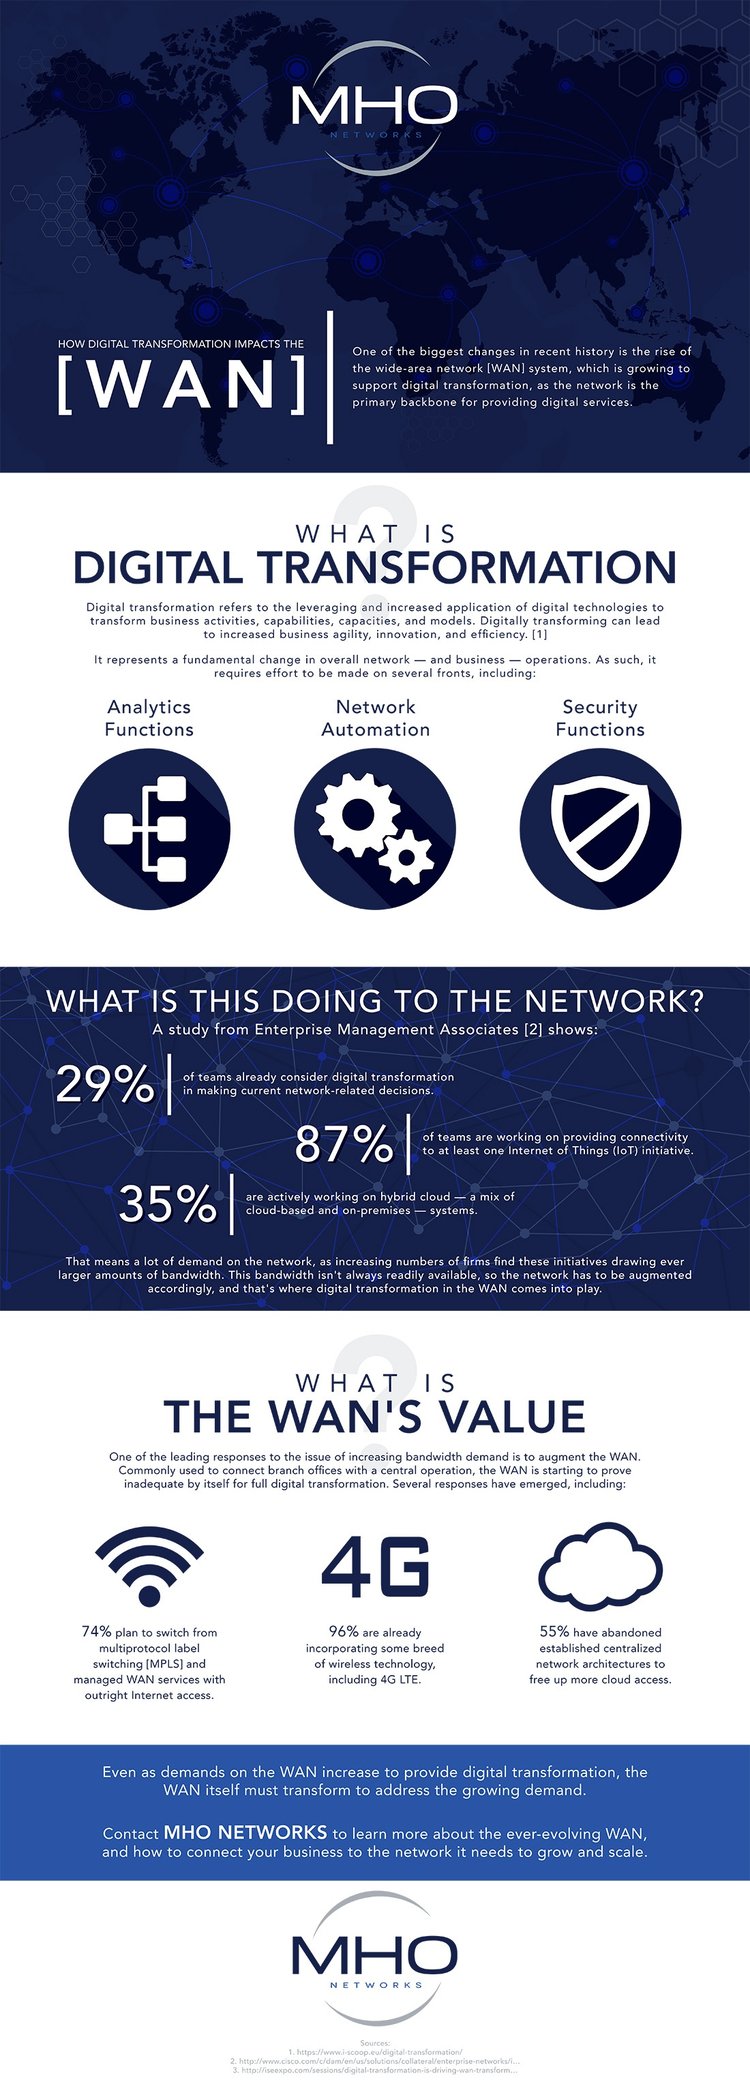 Digital transformation is improving the WAN's value for businesses like yours.